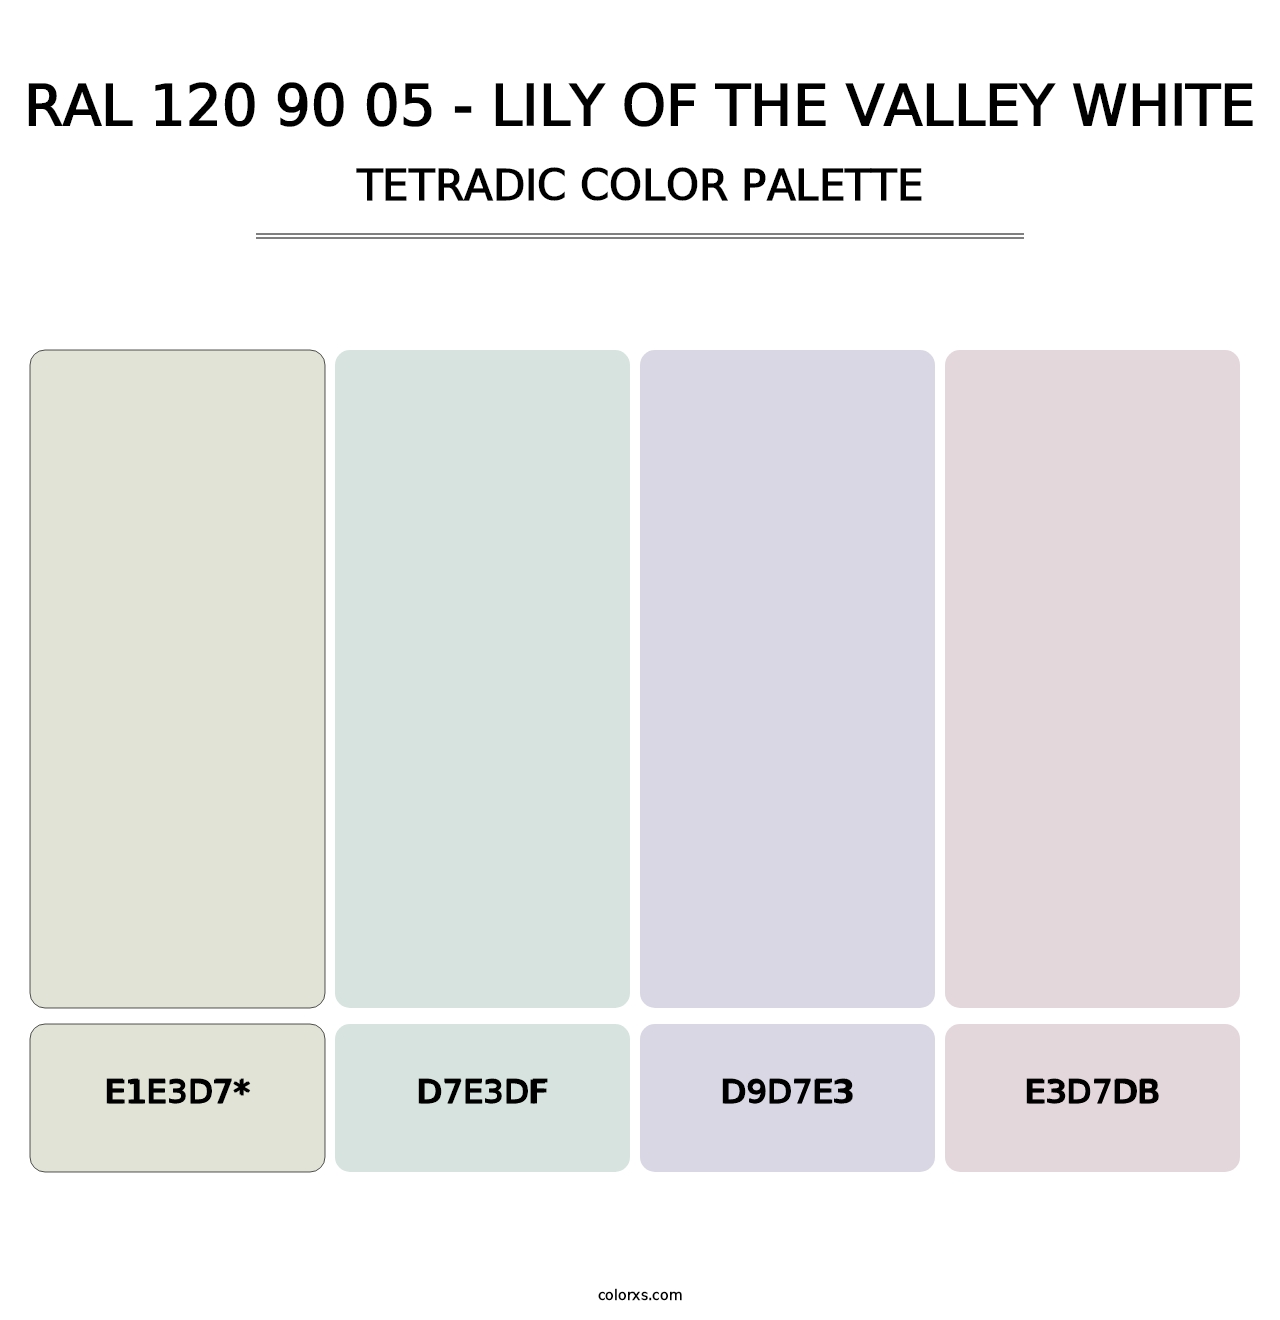 RAL 120 90 05 - Lily of the Valley White - Tetradic Color Palette